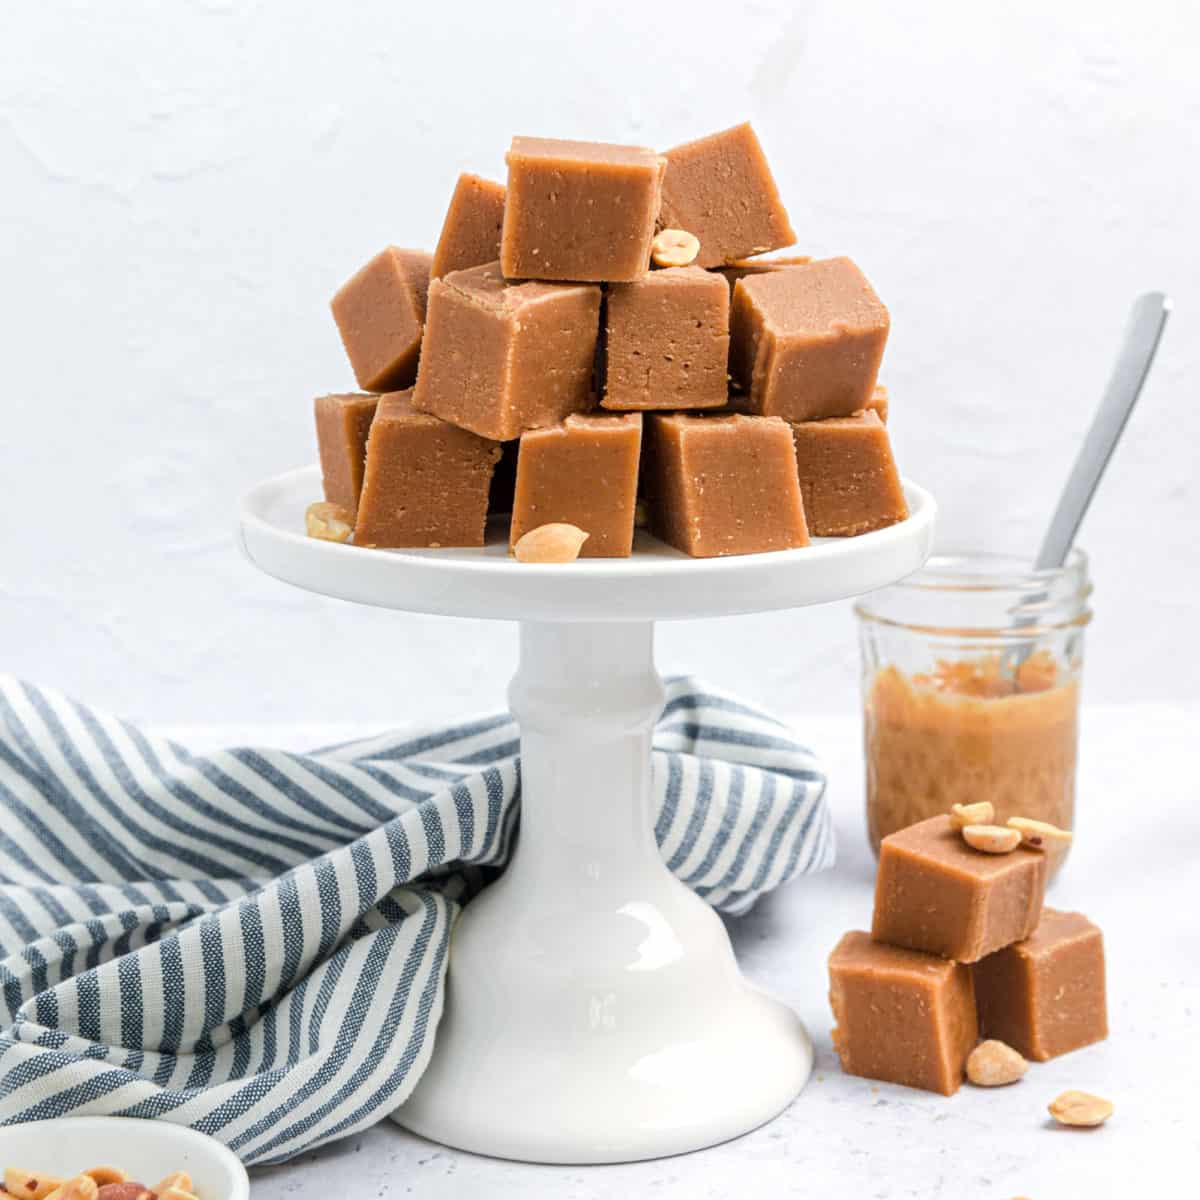 Square pieces of fudge on a stand ready to serve.